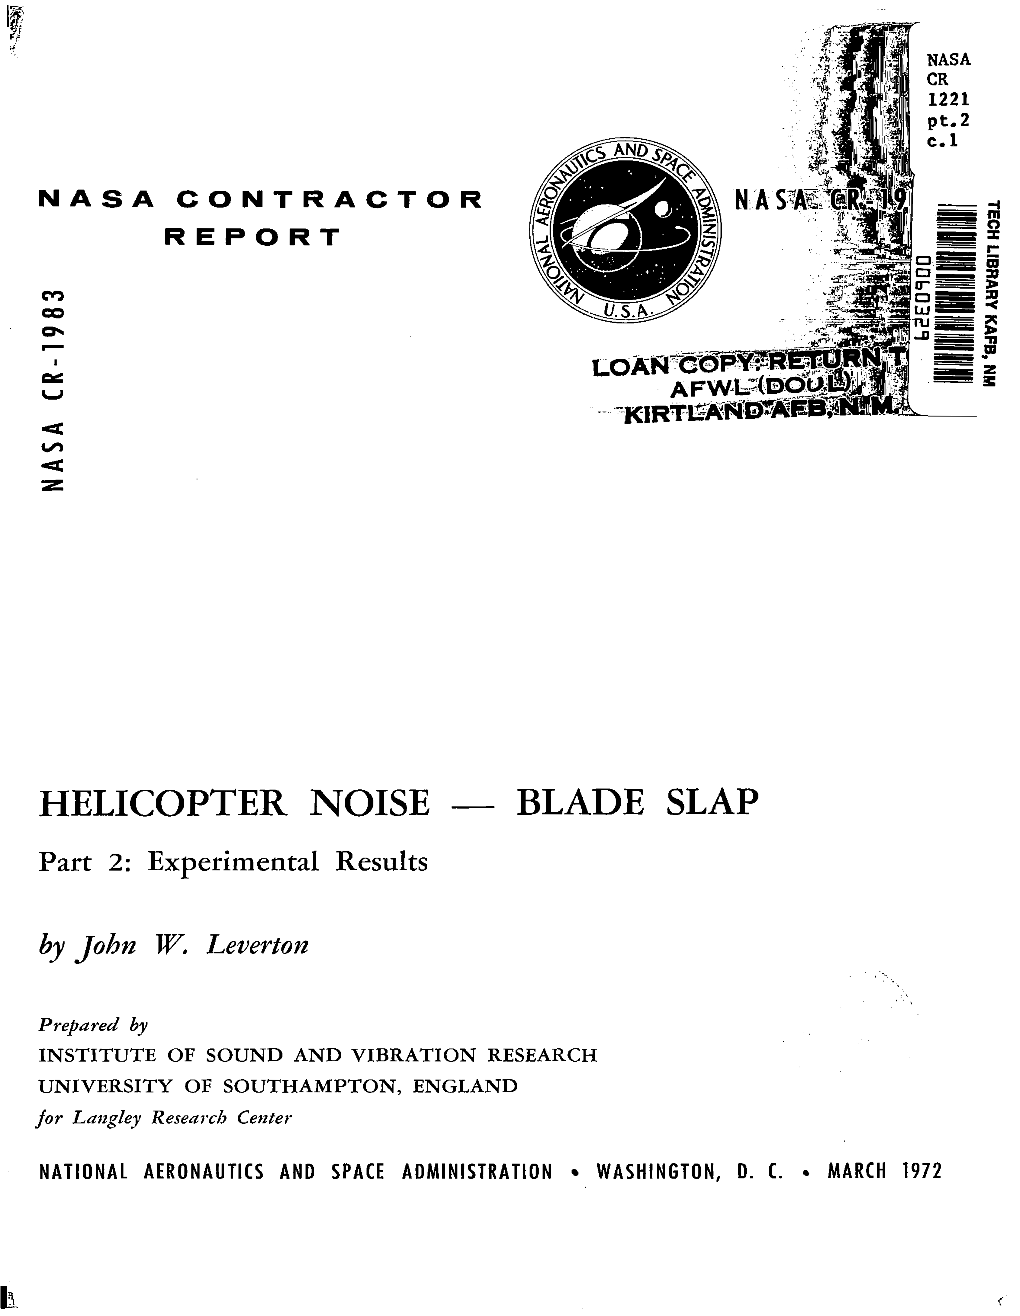 Helicopter Noise Contract